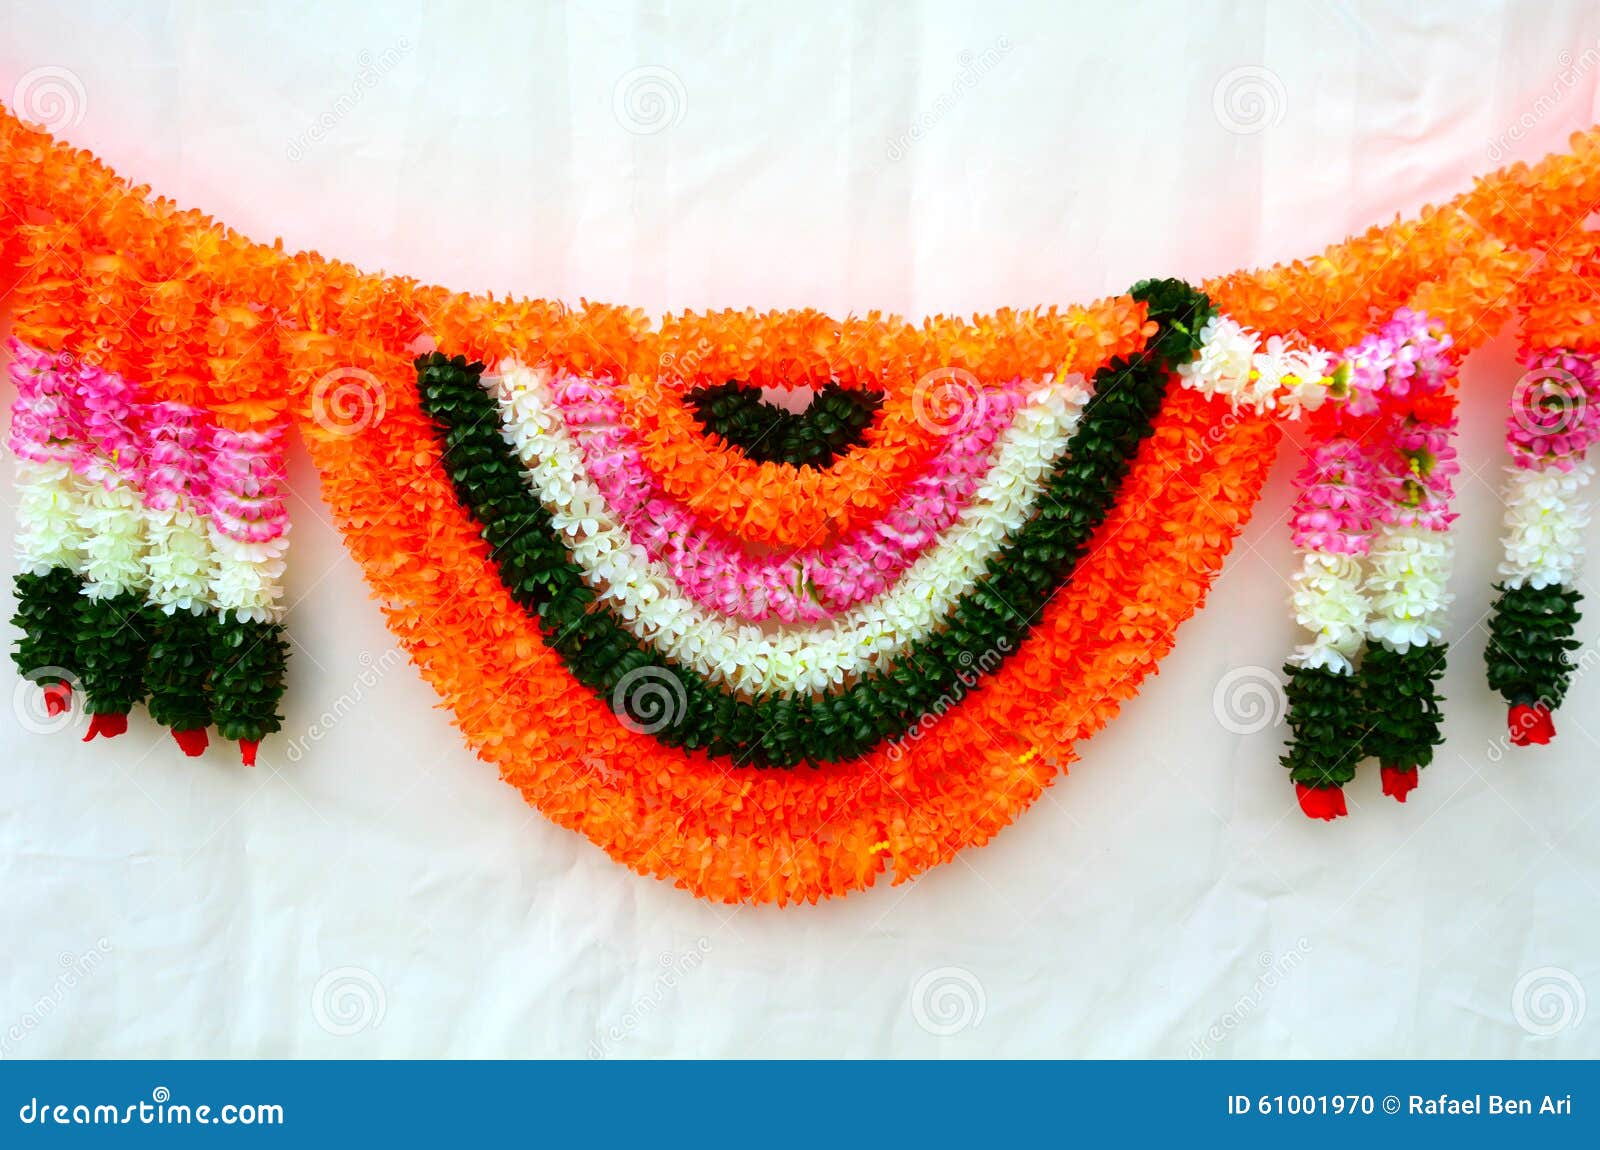 Flowers Decoration For Indian Festival Stock Photo - Image ...